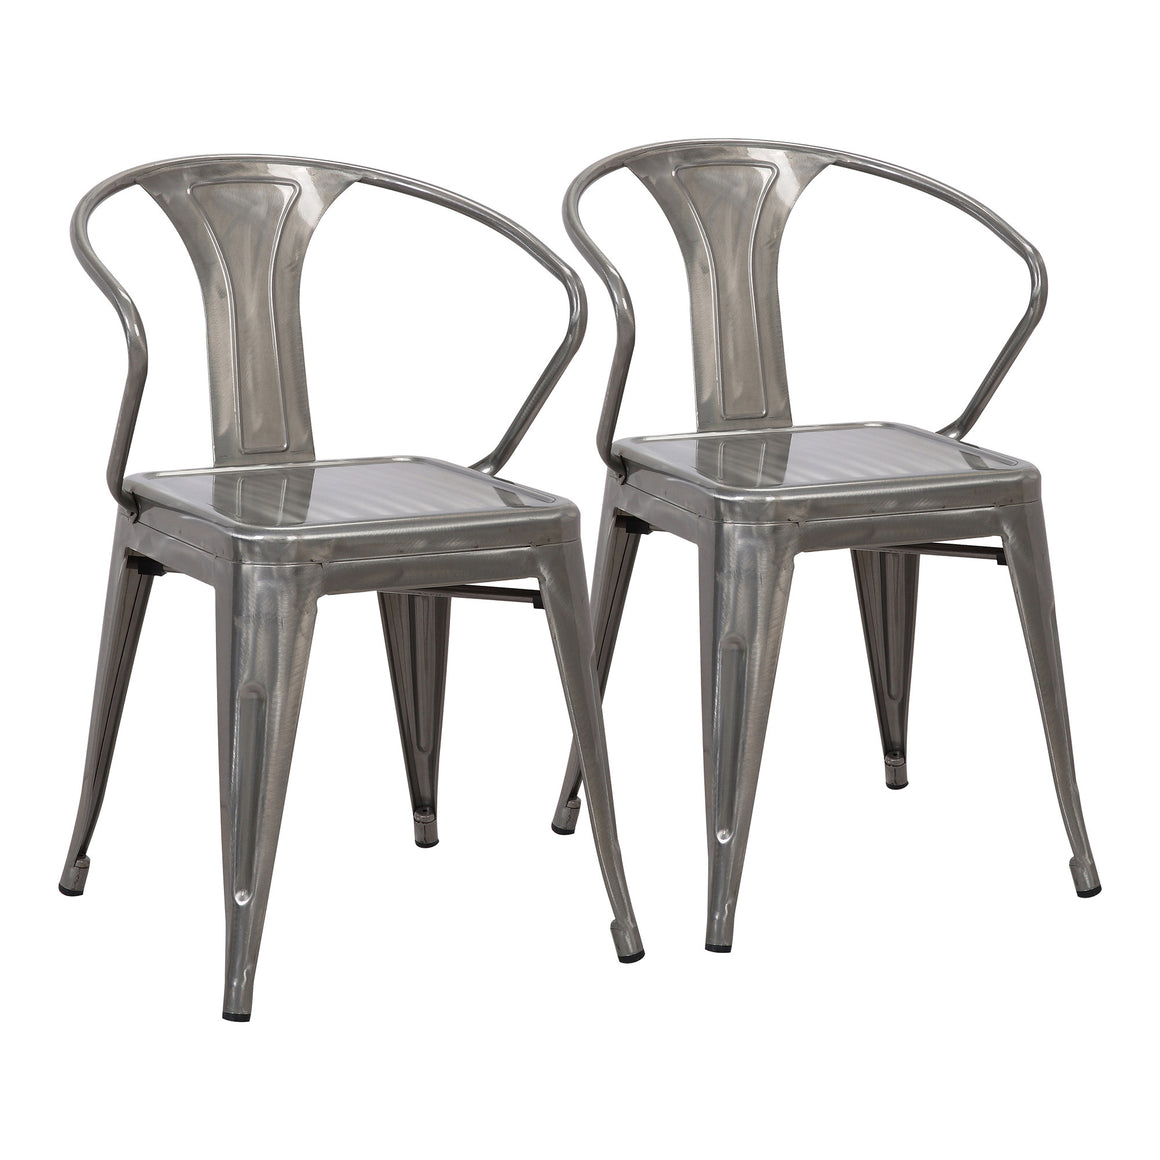 Waco Industrial Chair in Clear Brushed Silver Metal by LumiSource - Set of 2